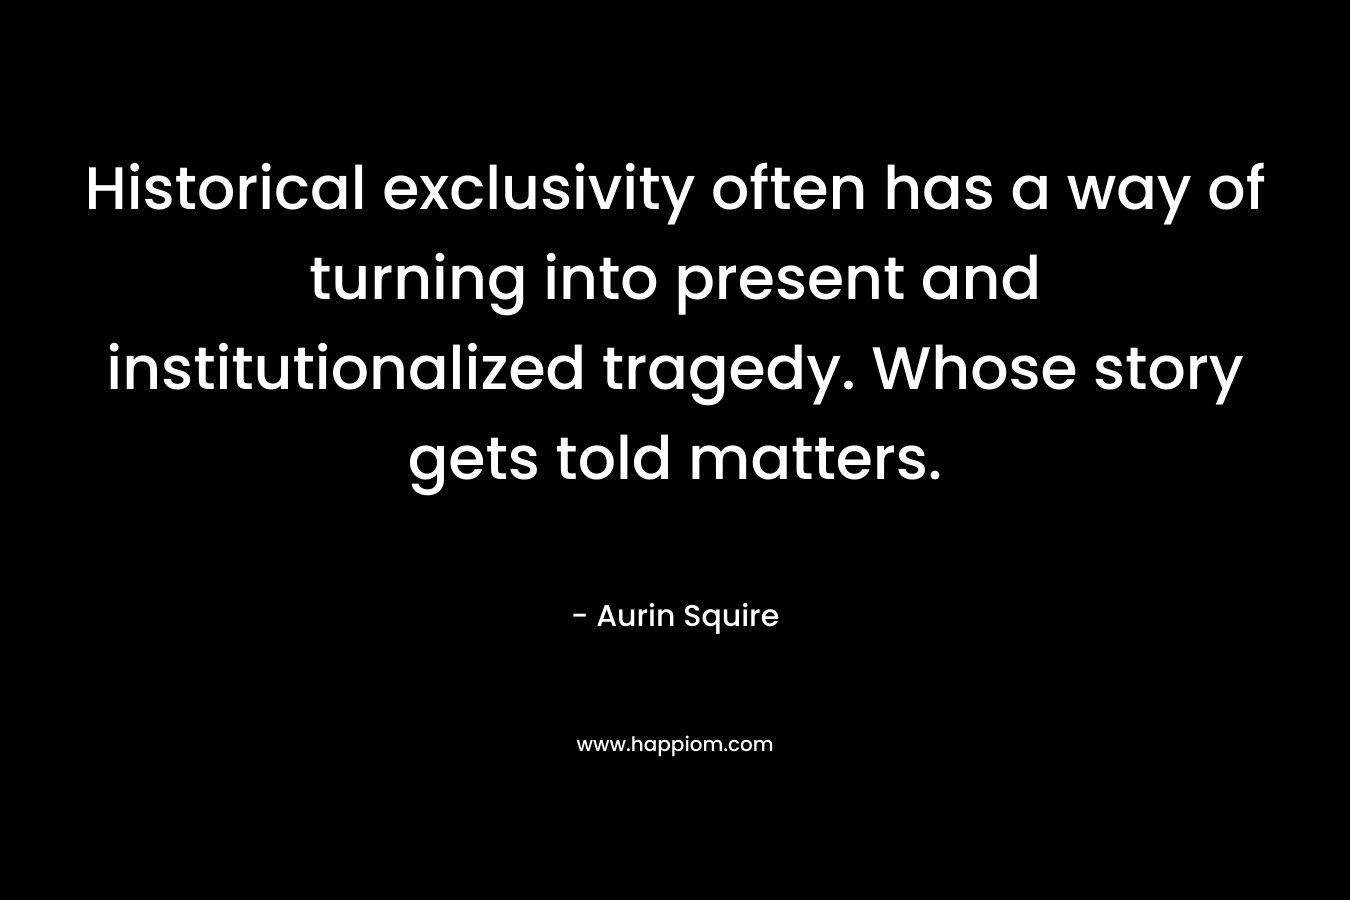 Historical exclusivity often has a way of turning into present and institutionalized tragedy. Whose story gets told matters. – Aurin Squire